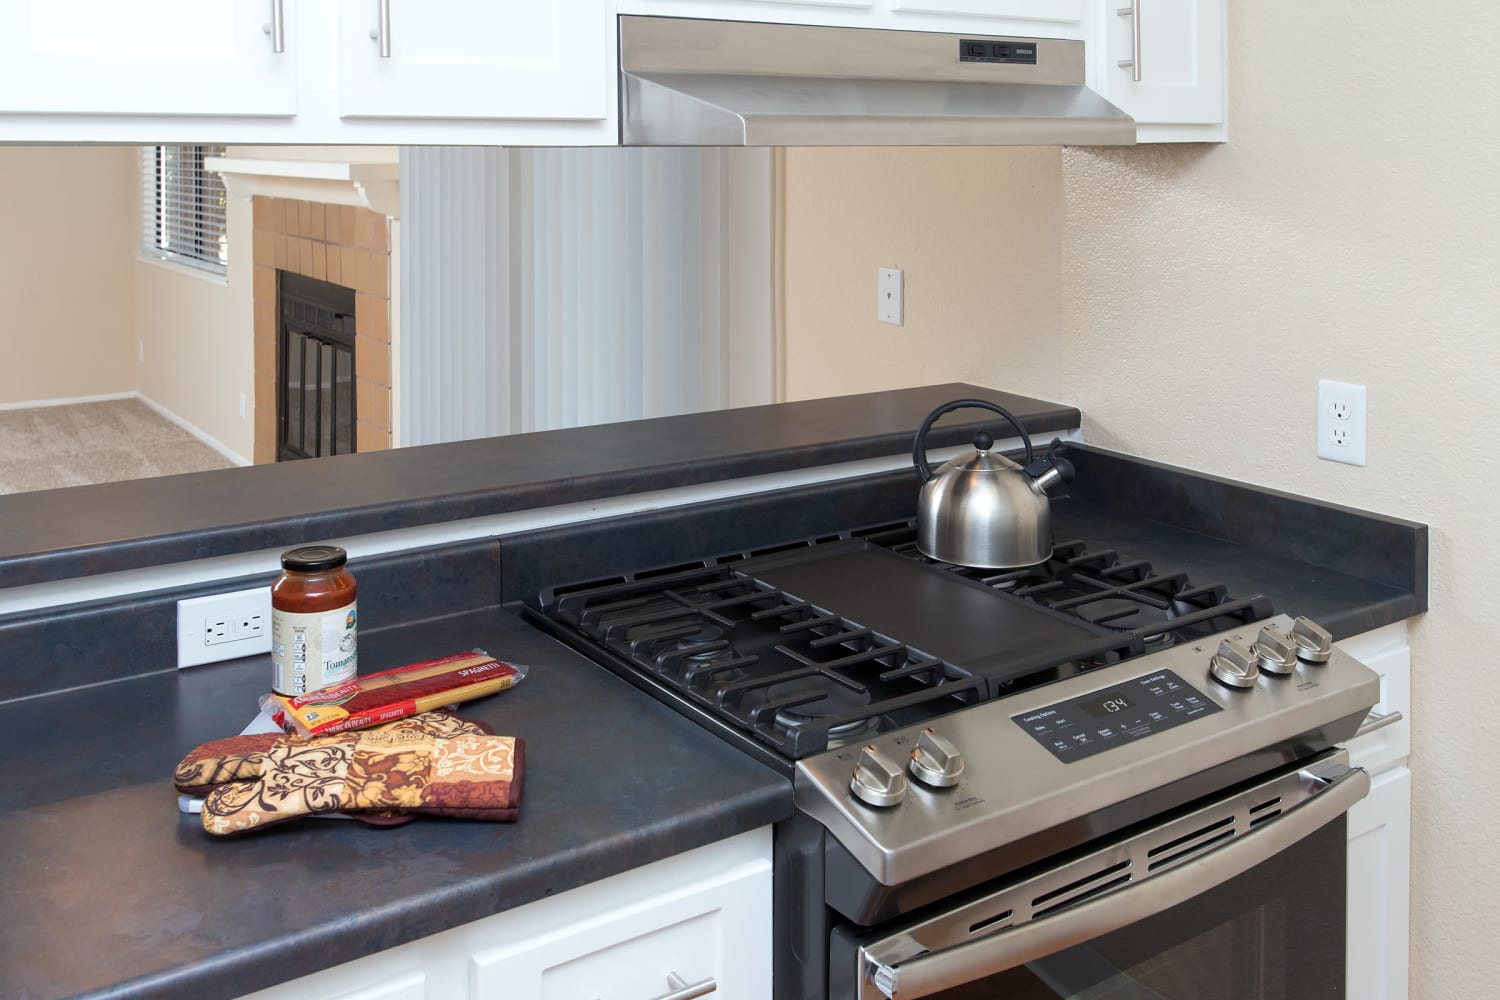 Kitchen photo of sink and oven at Amber Court in Fremont, California